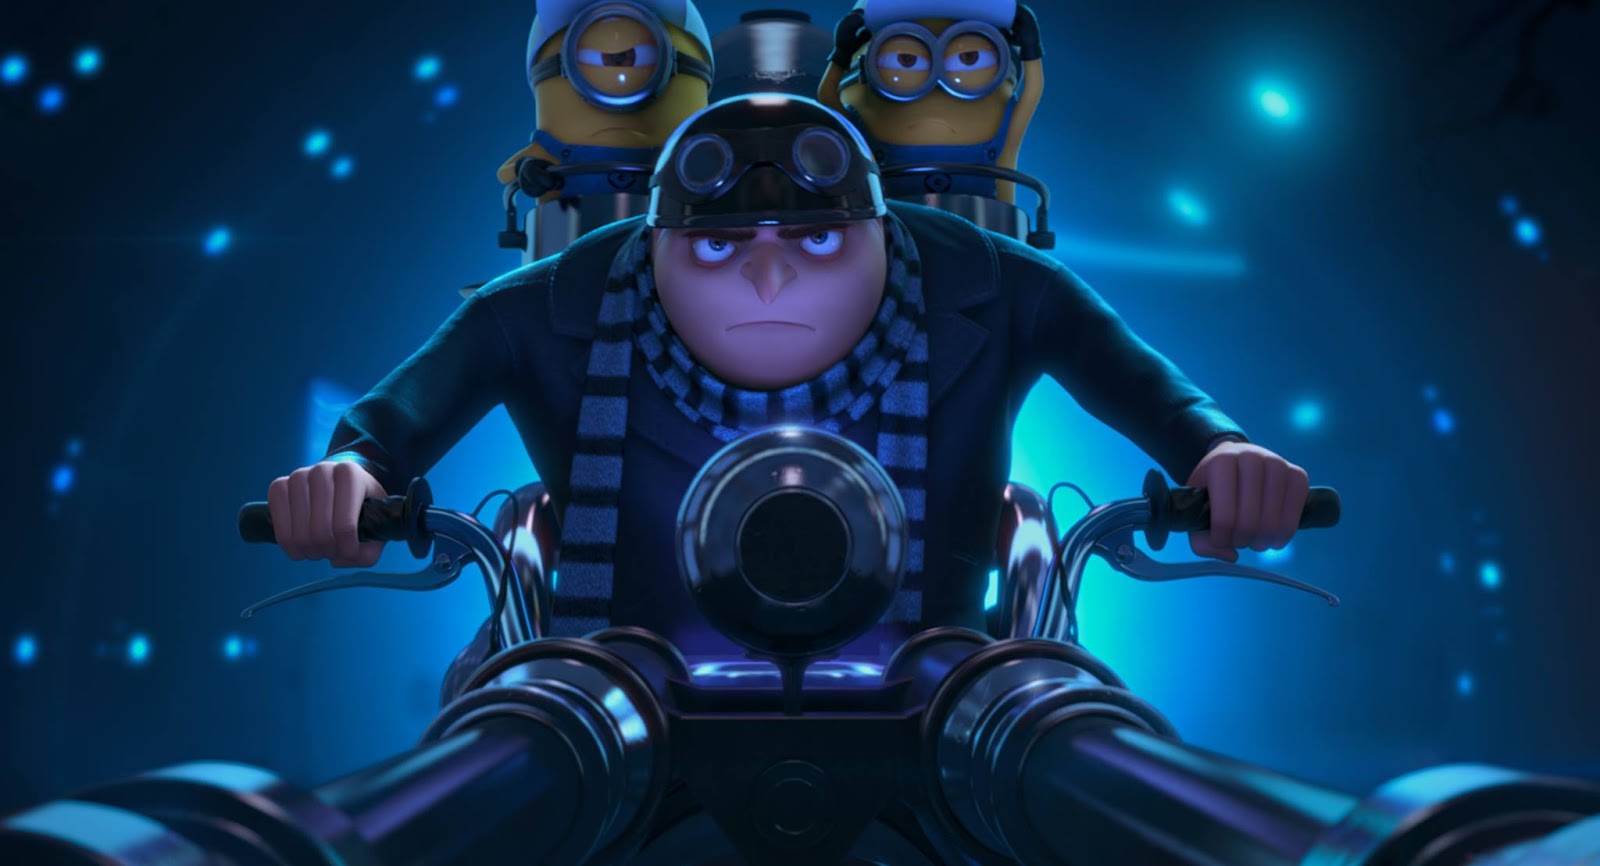 OH MY GOD OK so I was watching despicable me and Gru made this